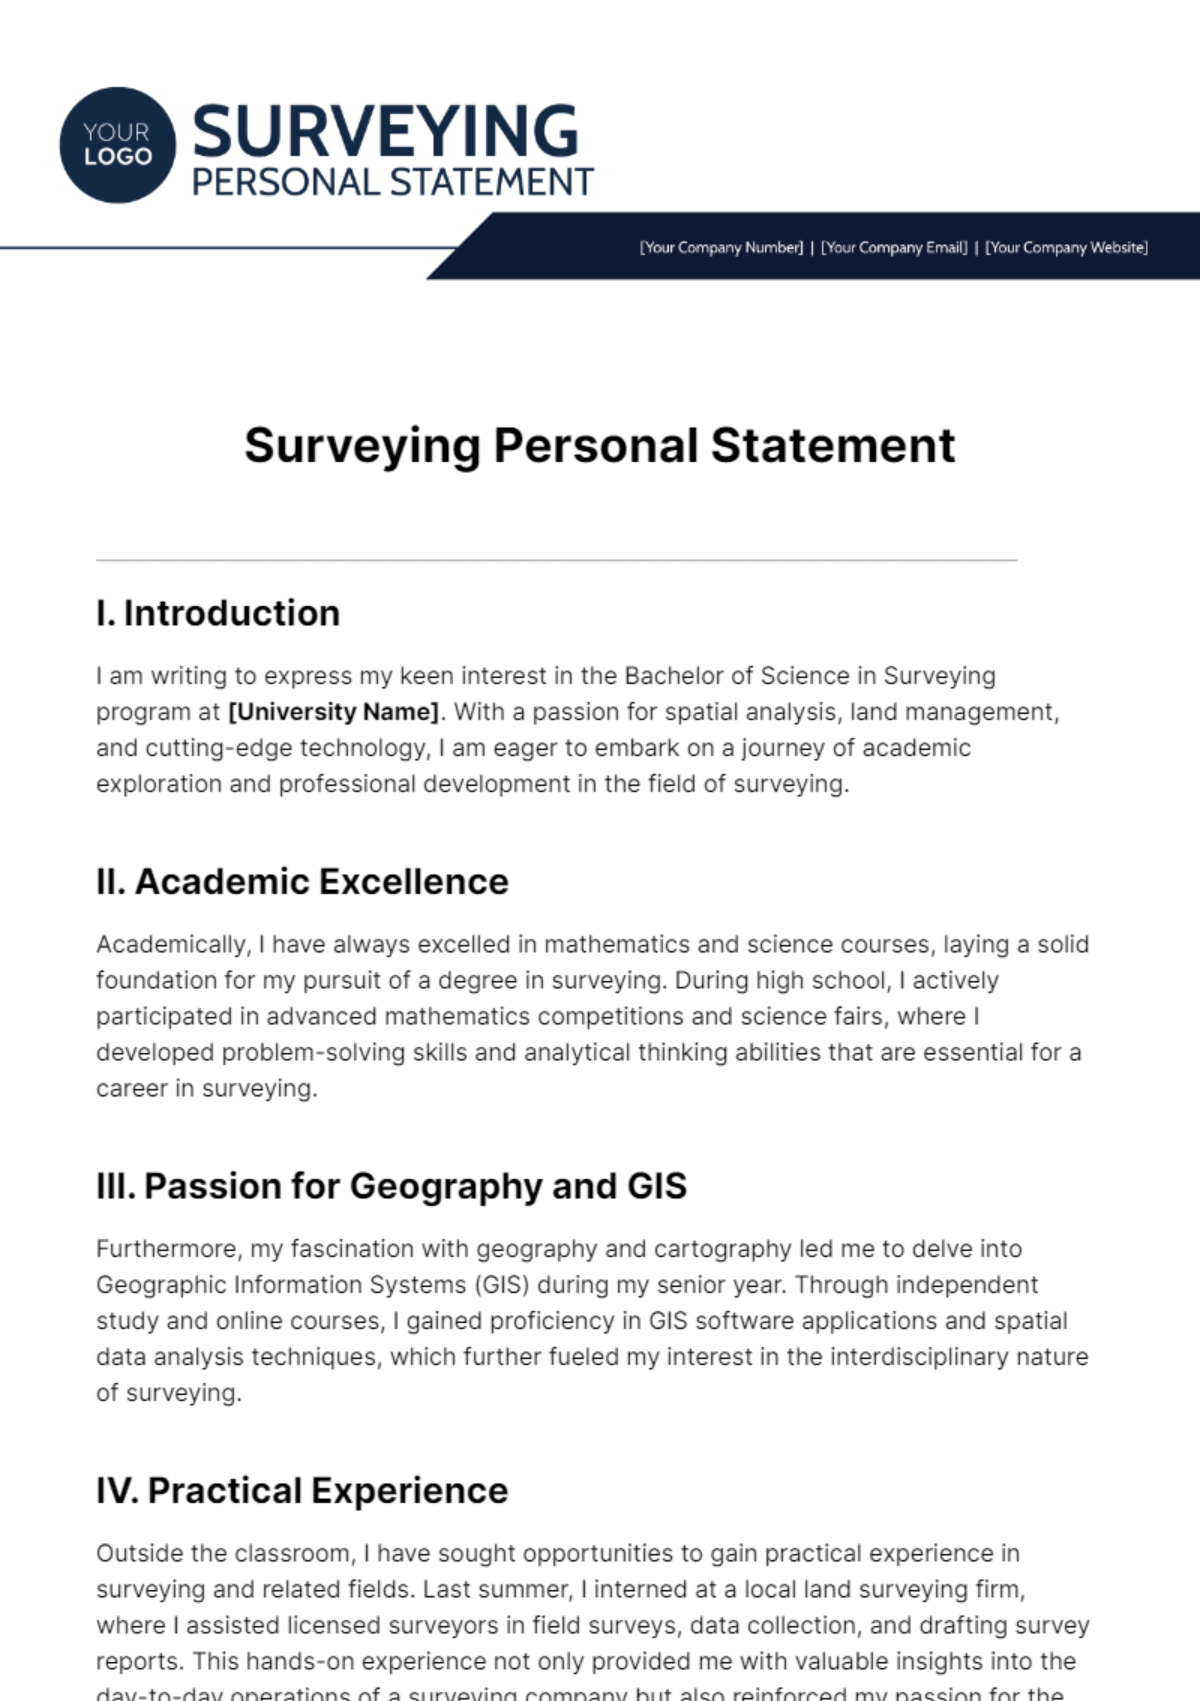 Surveying Personal Statement Template